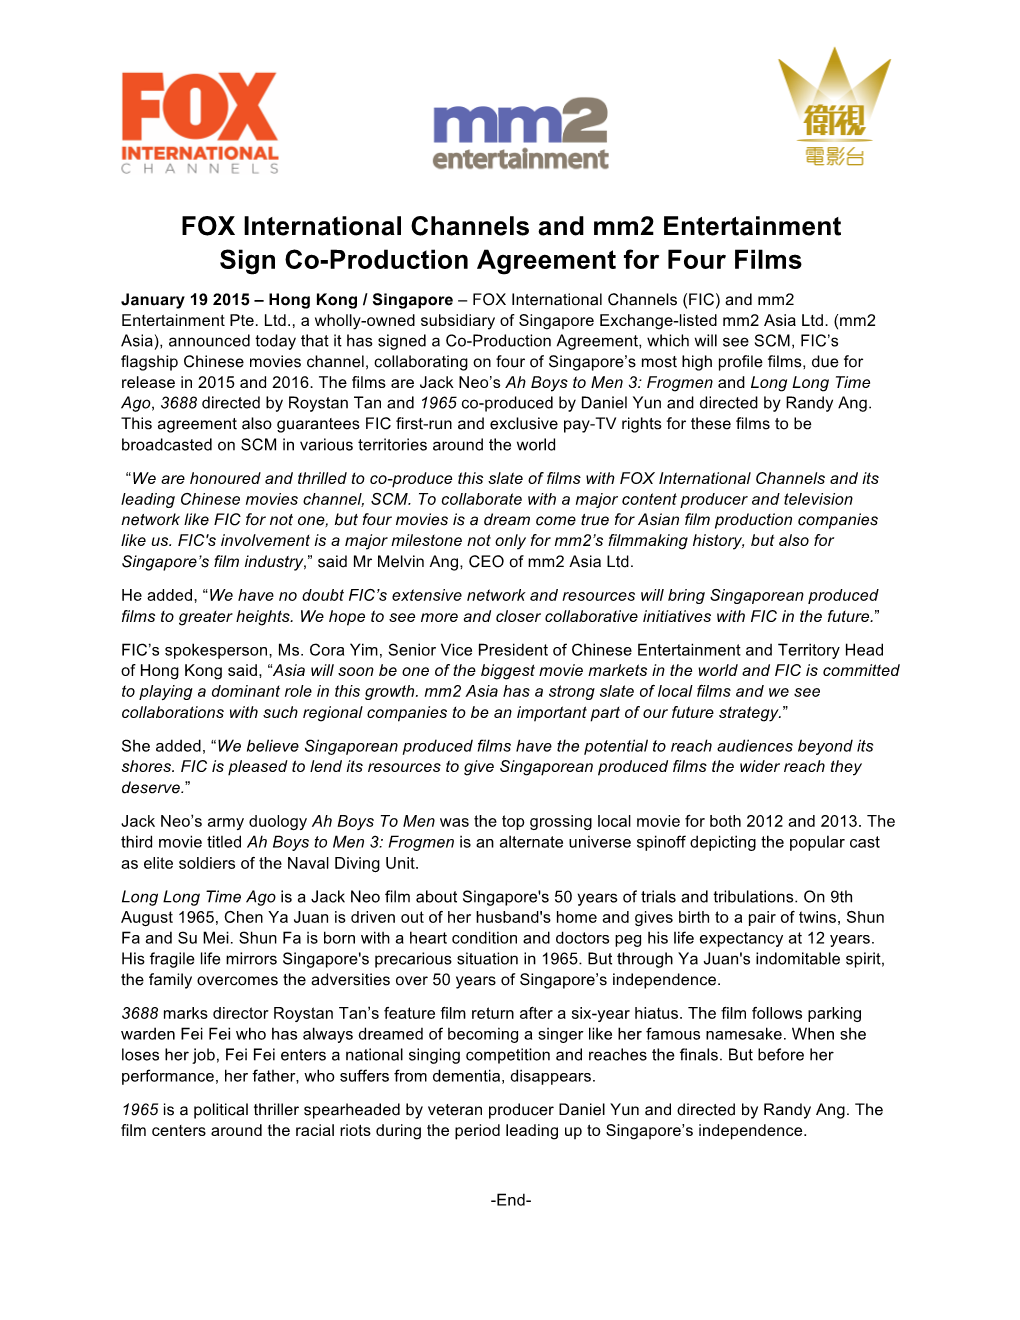 FOX International Channels and Mm2 Entertainment Sign Co-Production Agreement for Four Films